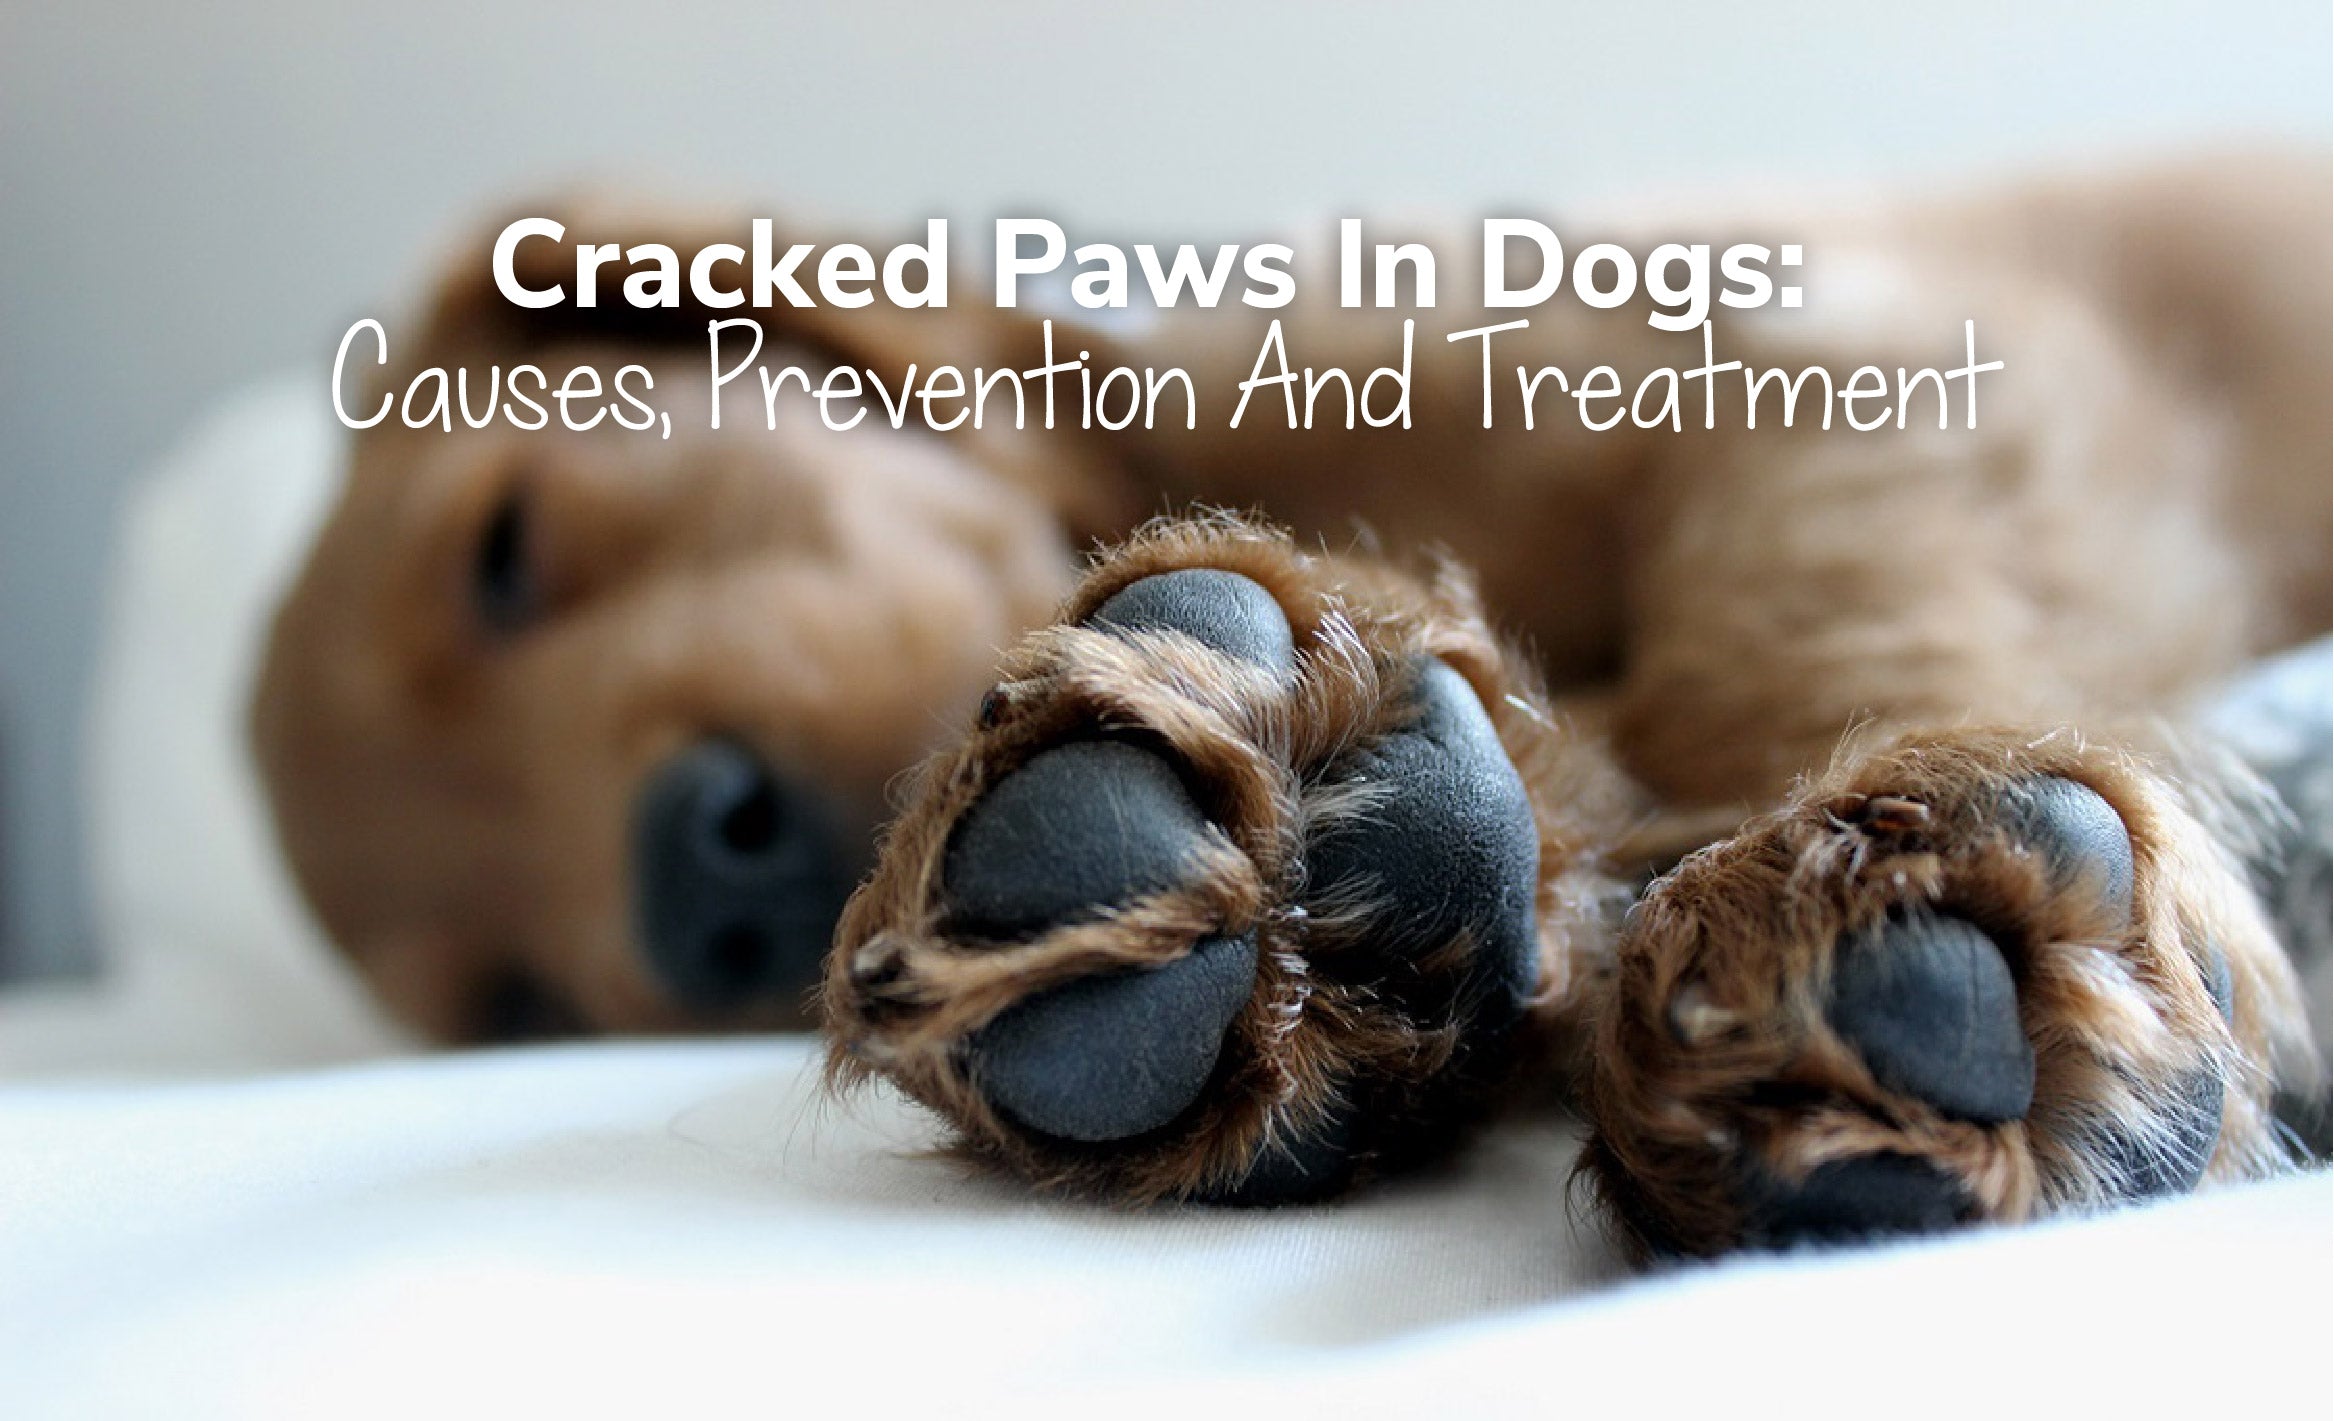 are cracked paws bad for dogs